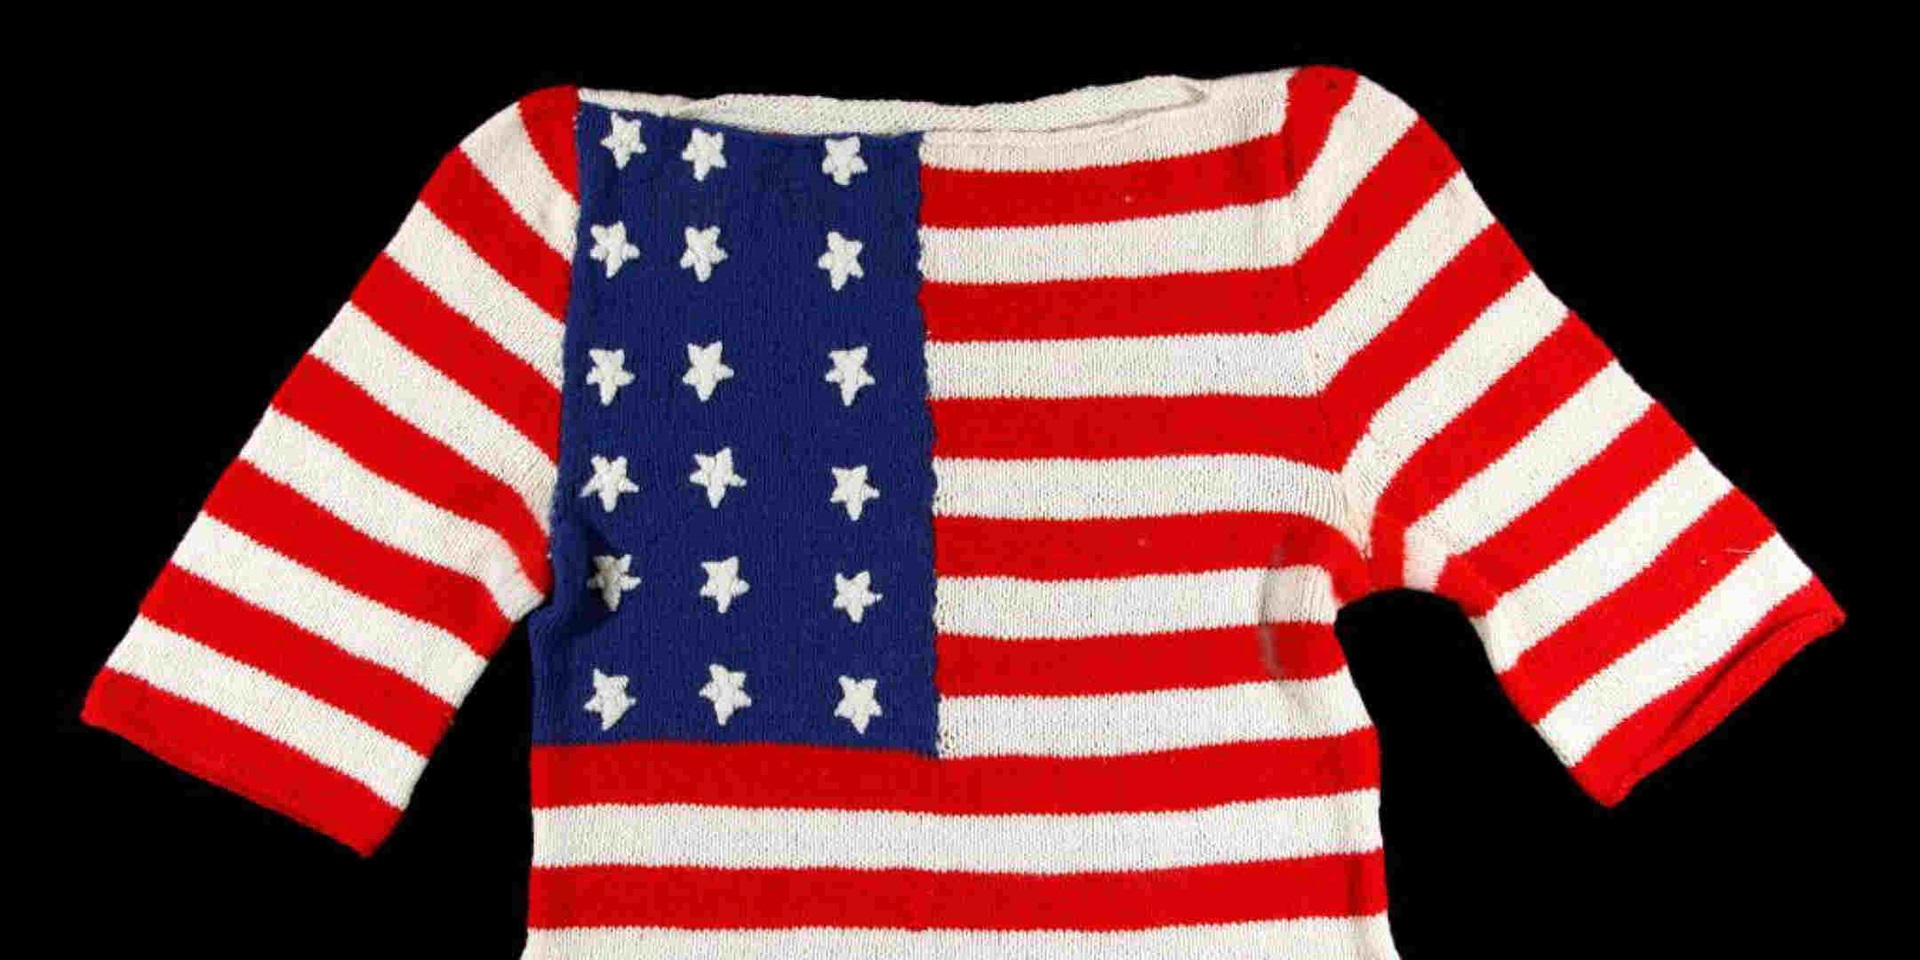 Stars and Stripes jumper, Gift from Audrey Capuano, ANMM Collection 00009354